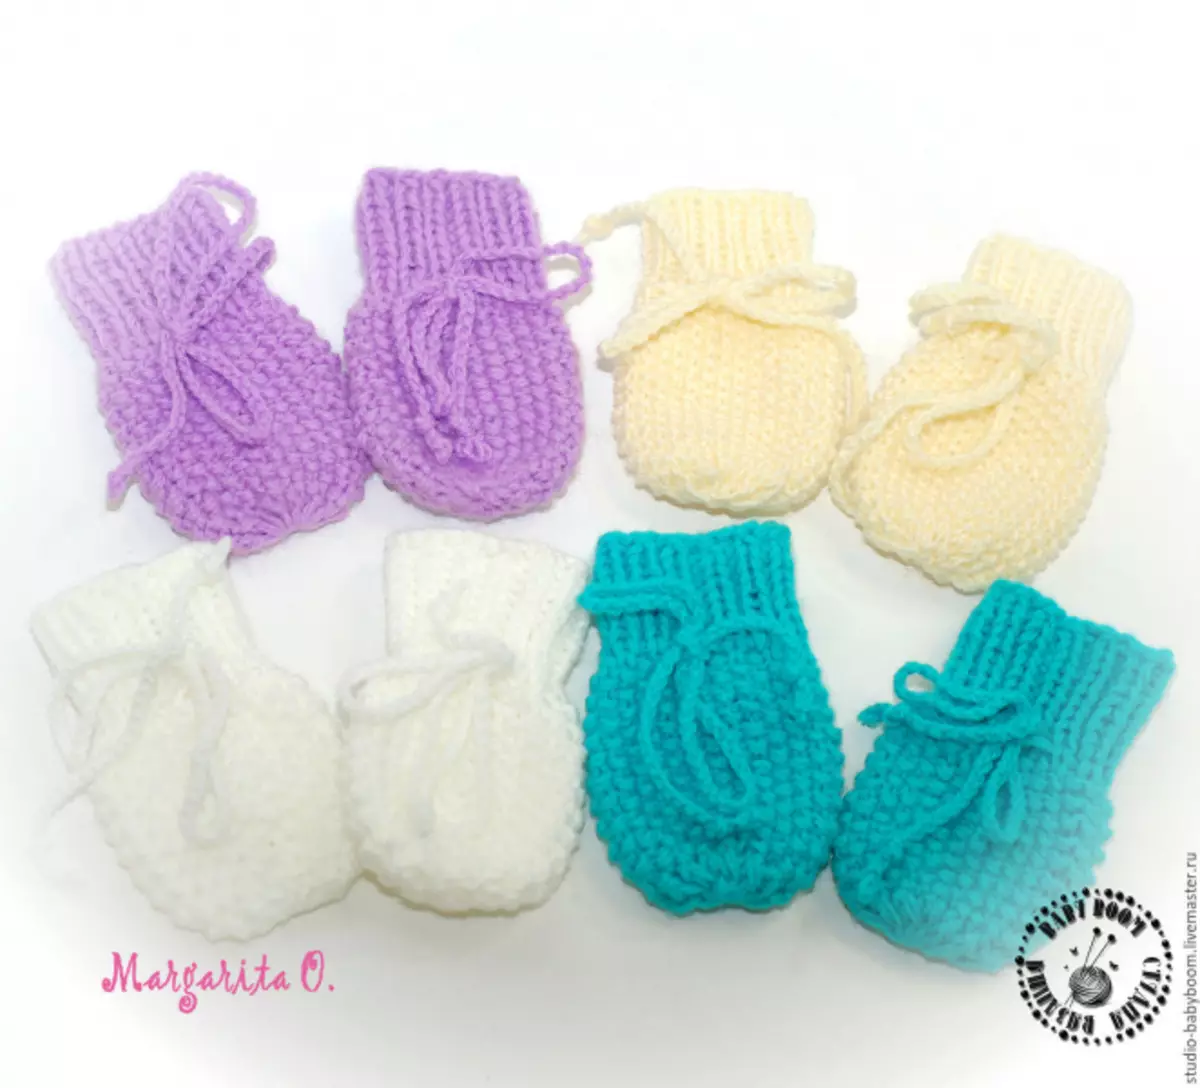 Mittens for newborn knitting needles with description and video